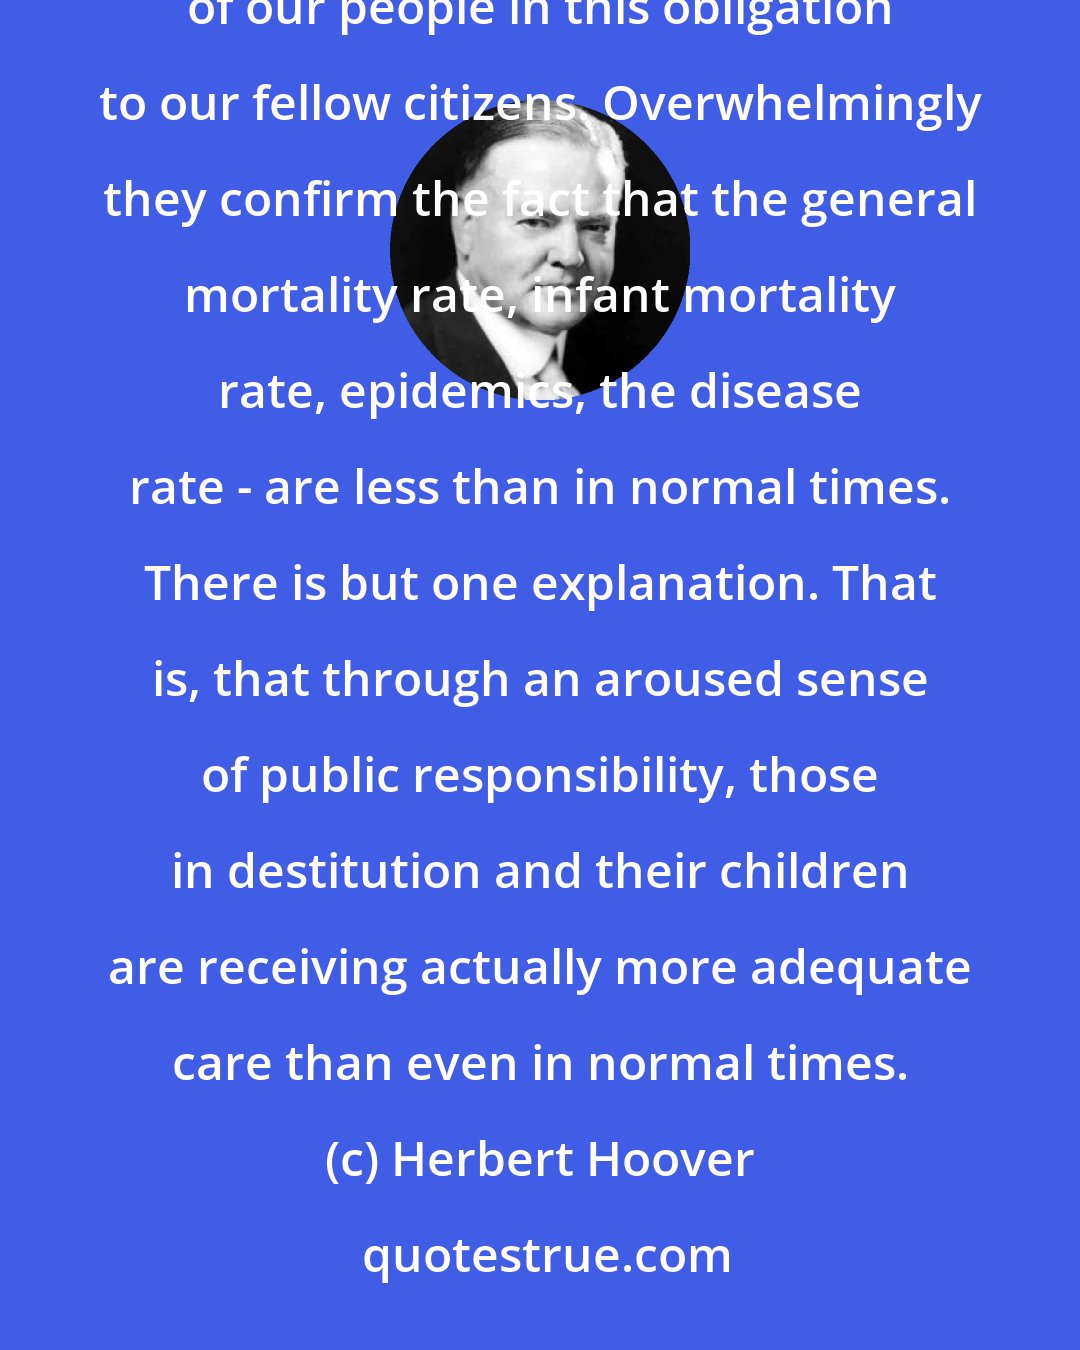 Herbert Hoover: Reports to the Surgeon General represent the final word upon the efficient and devoted sense of responsibility of our people in this obligation to our fellow citizens. Overwhelmingly they confirm the fact that the general mortality rate, infant mortality rate, epidemics, the disease rate - are less than in normal times. There is but one explanation. That is, that through an aroused sense of public responsibility, those in destitution and their children are receiving actually more adequate care than even in normal times.